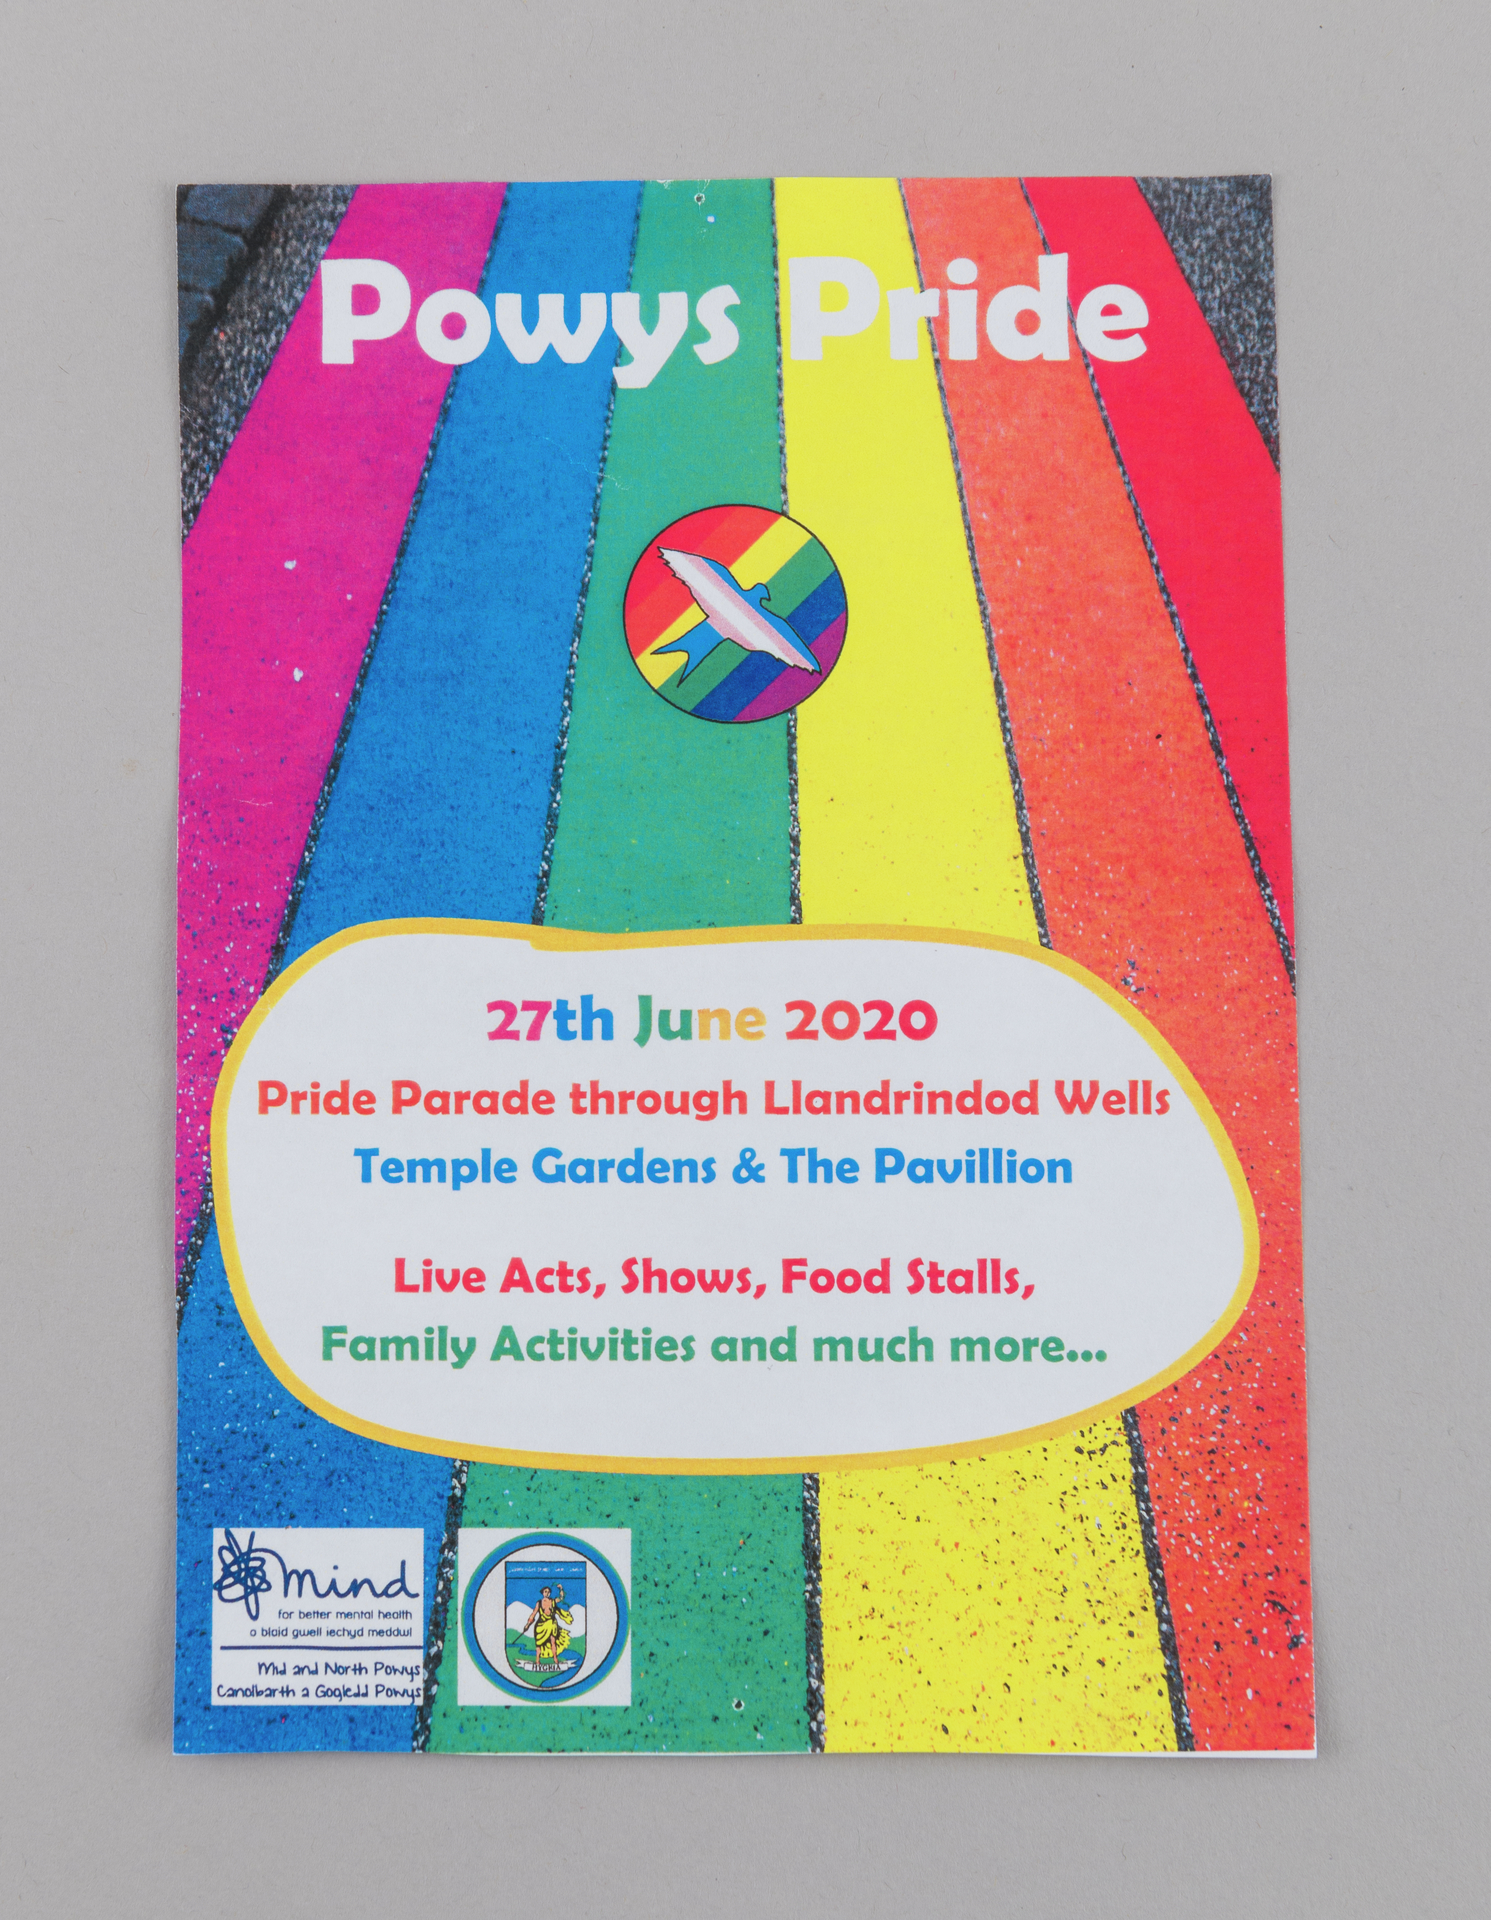 Flyer is for what would have been the first Powys Pride